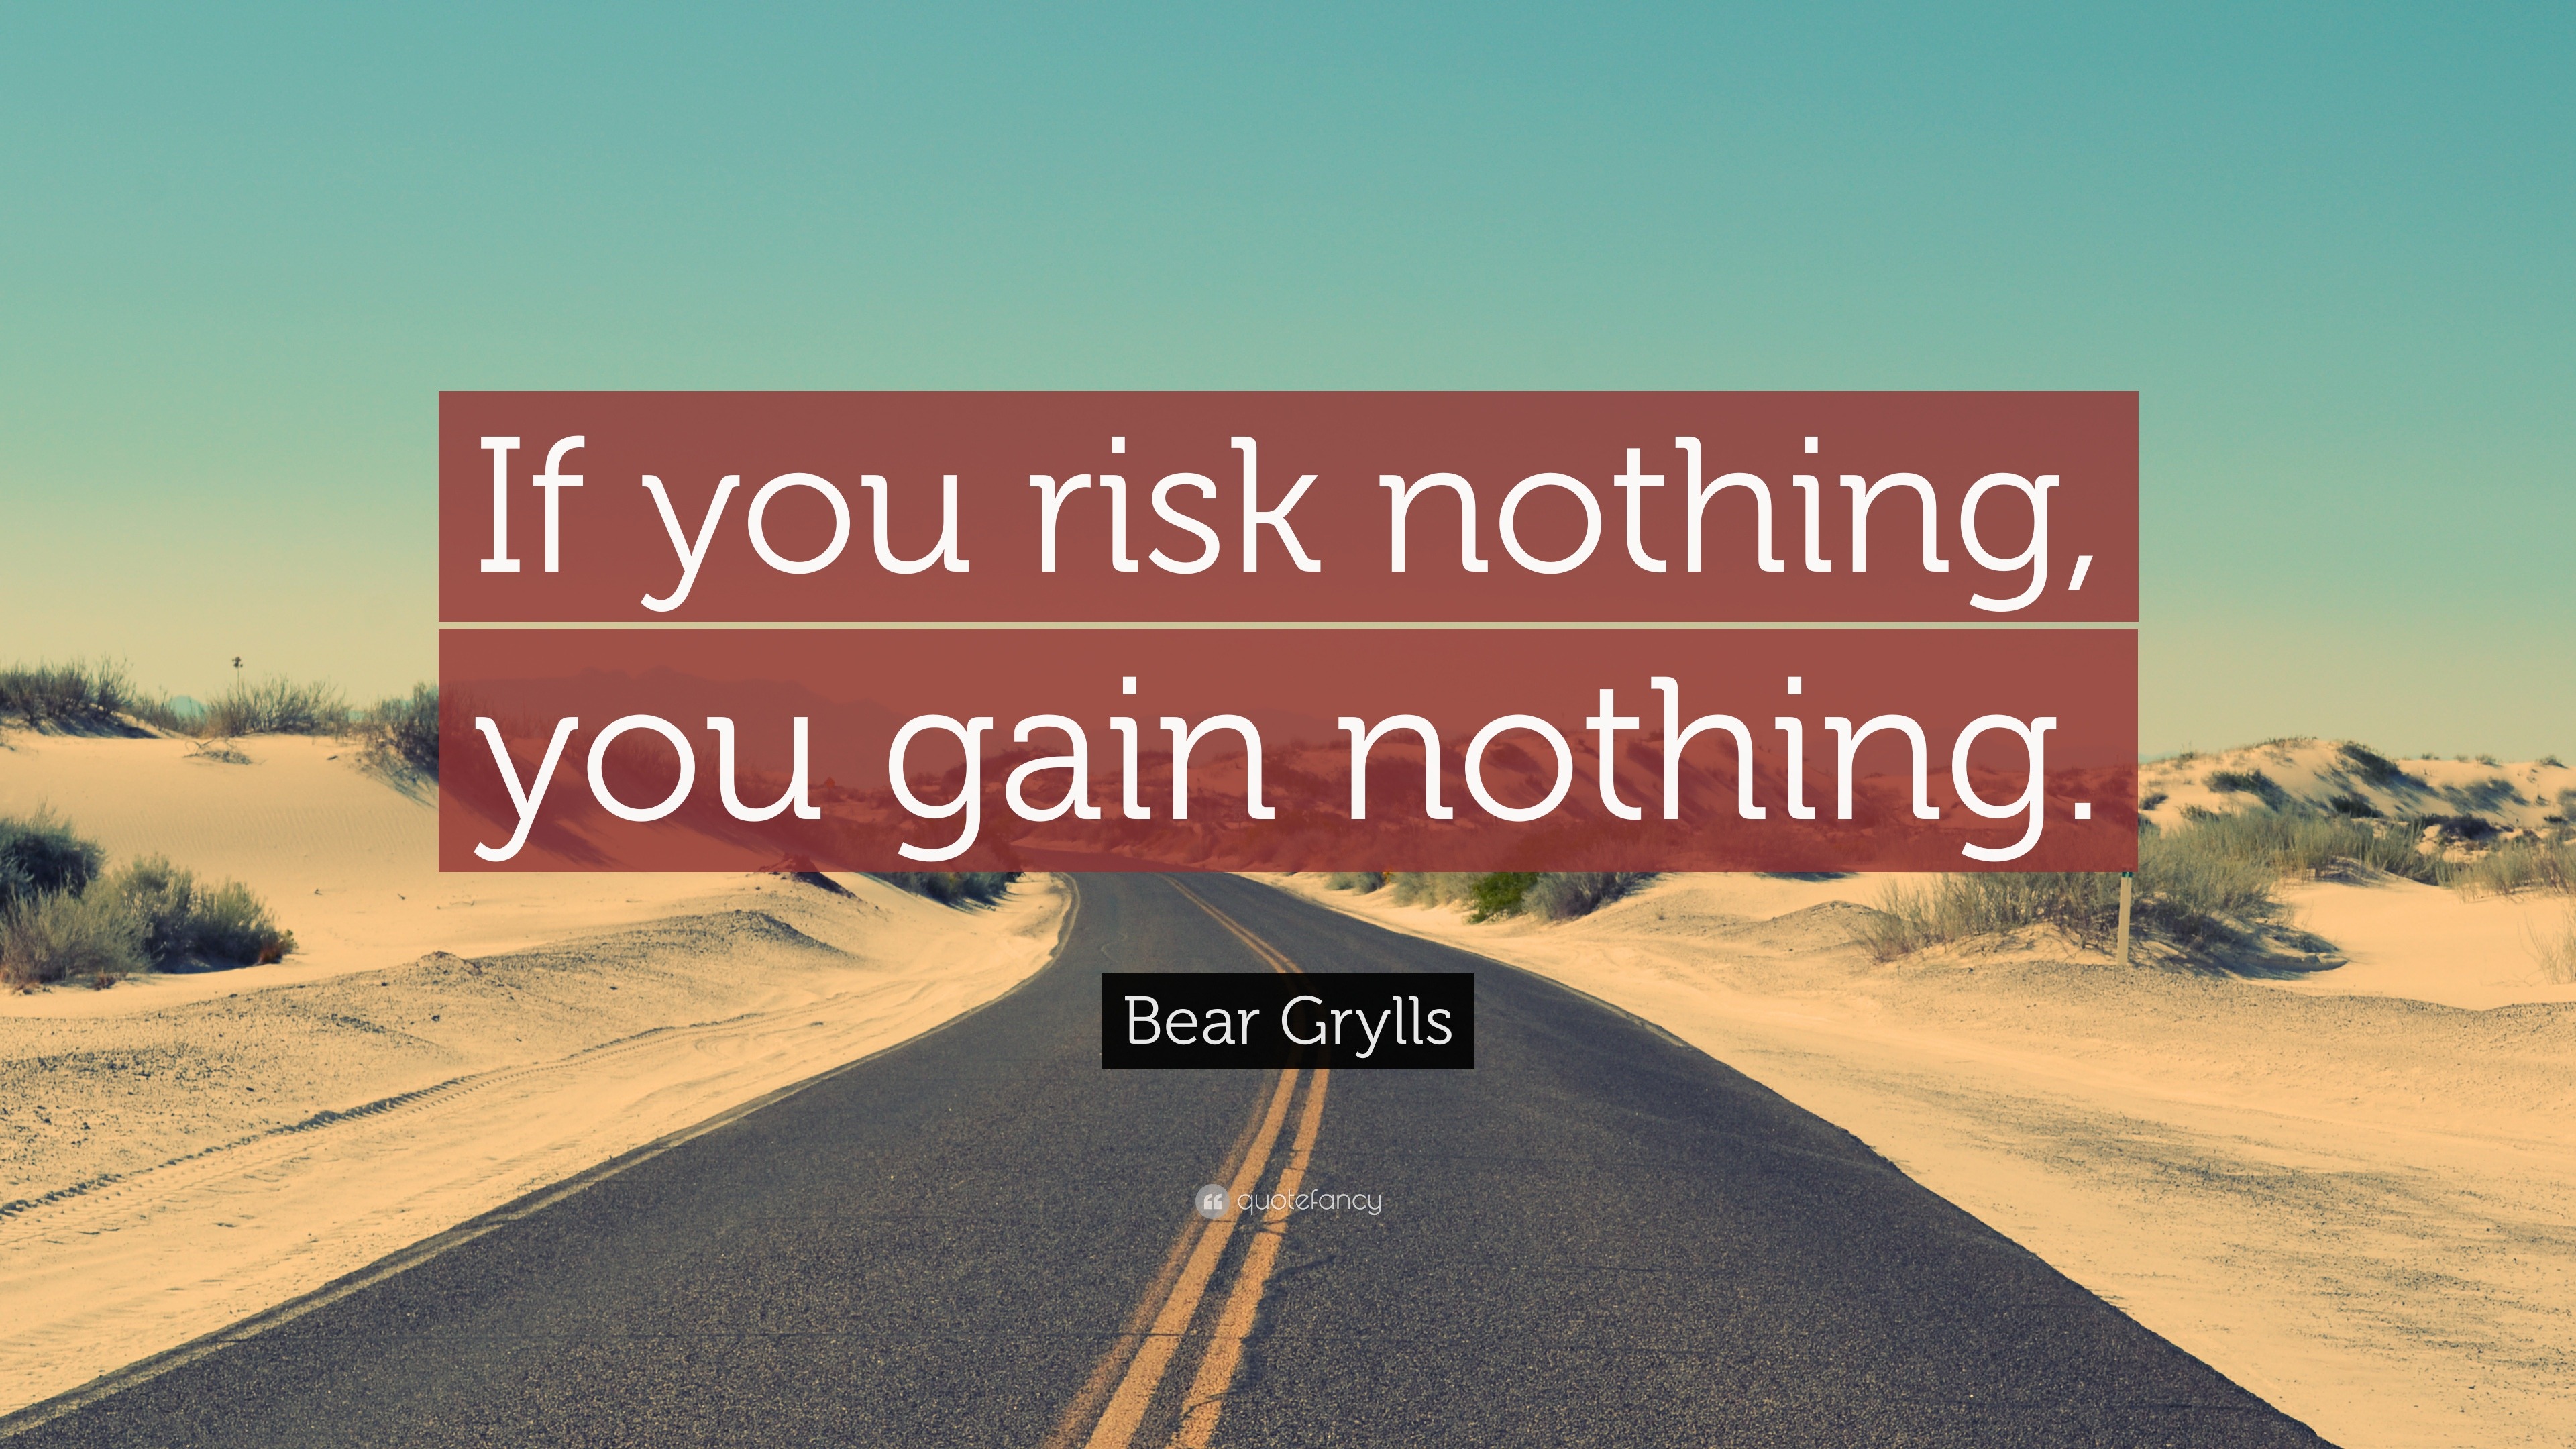 Bear Grylls Quote: “If you risk nothing, you gain nothing.”